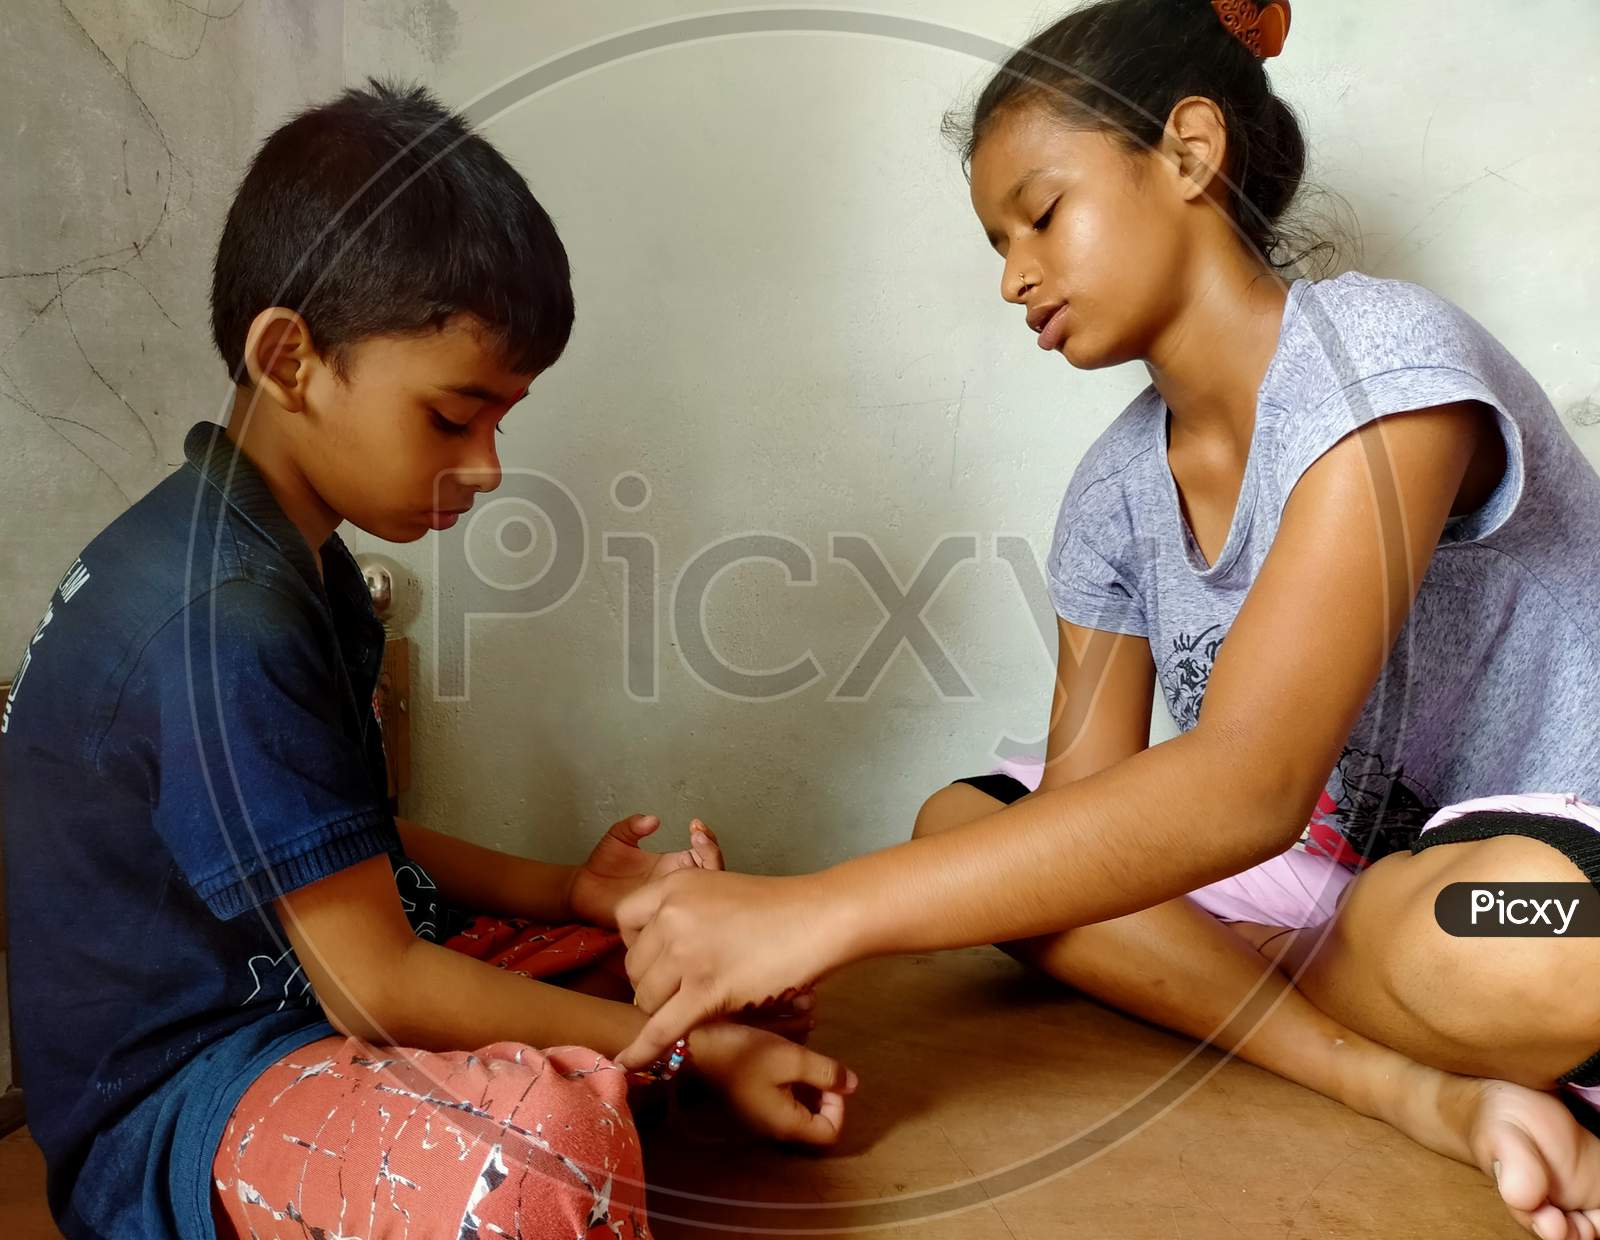 An Indian sister tieing Rakhi on hand of her brother